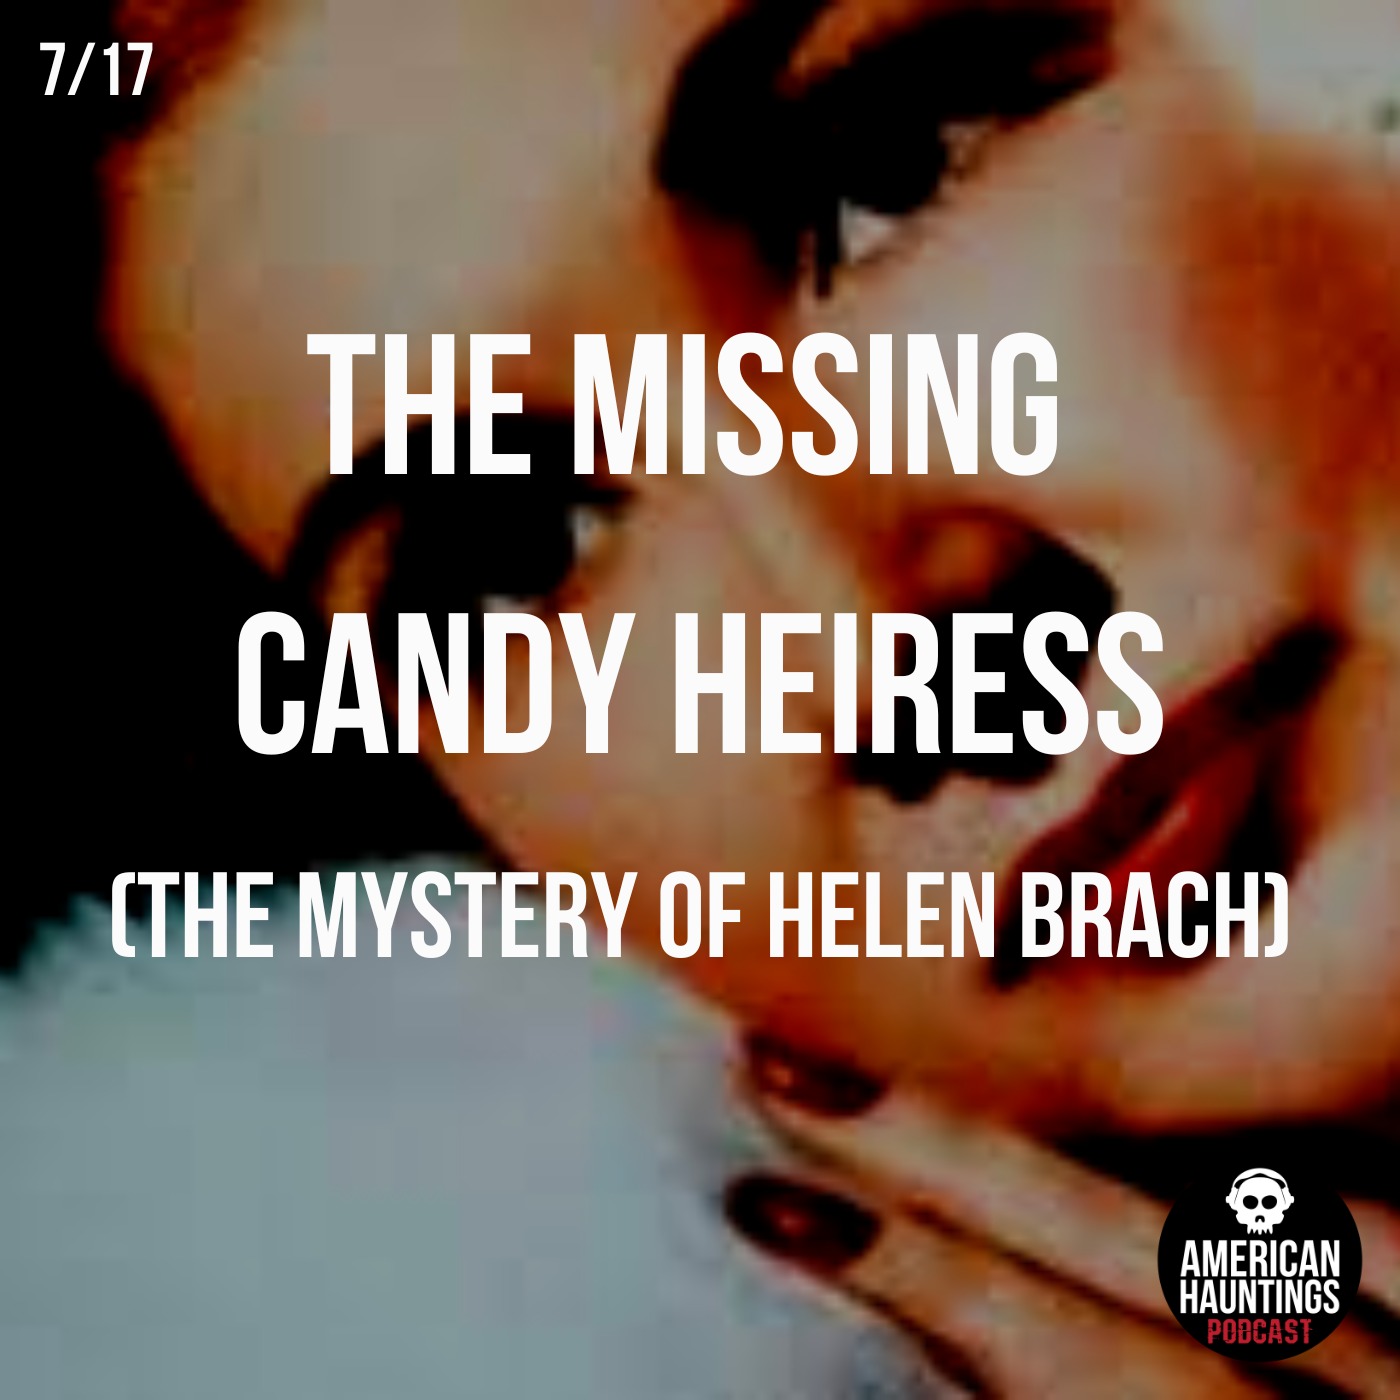 The Missing Candy Heiress (The Mystery Of Helen Brach)